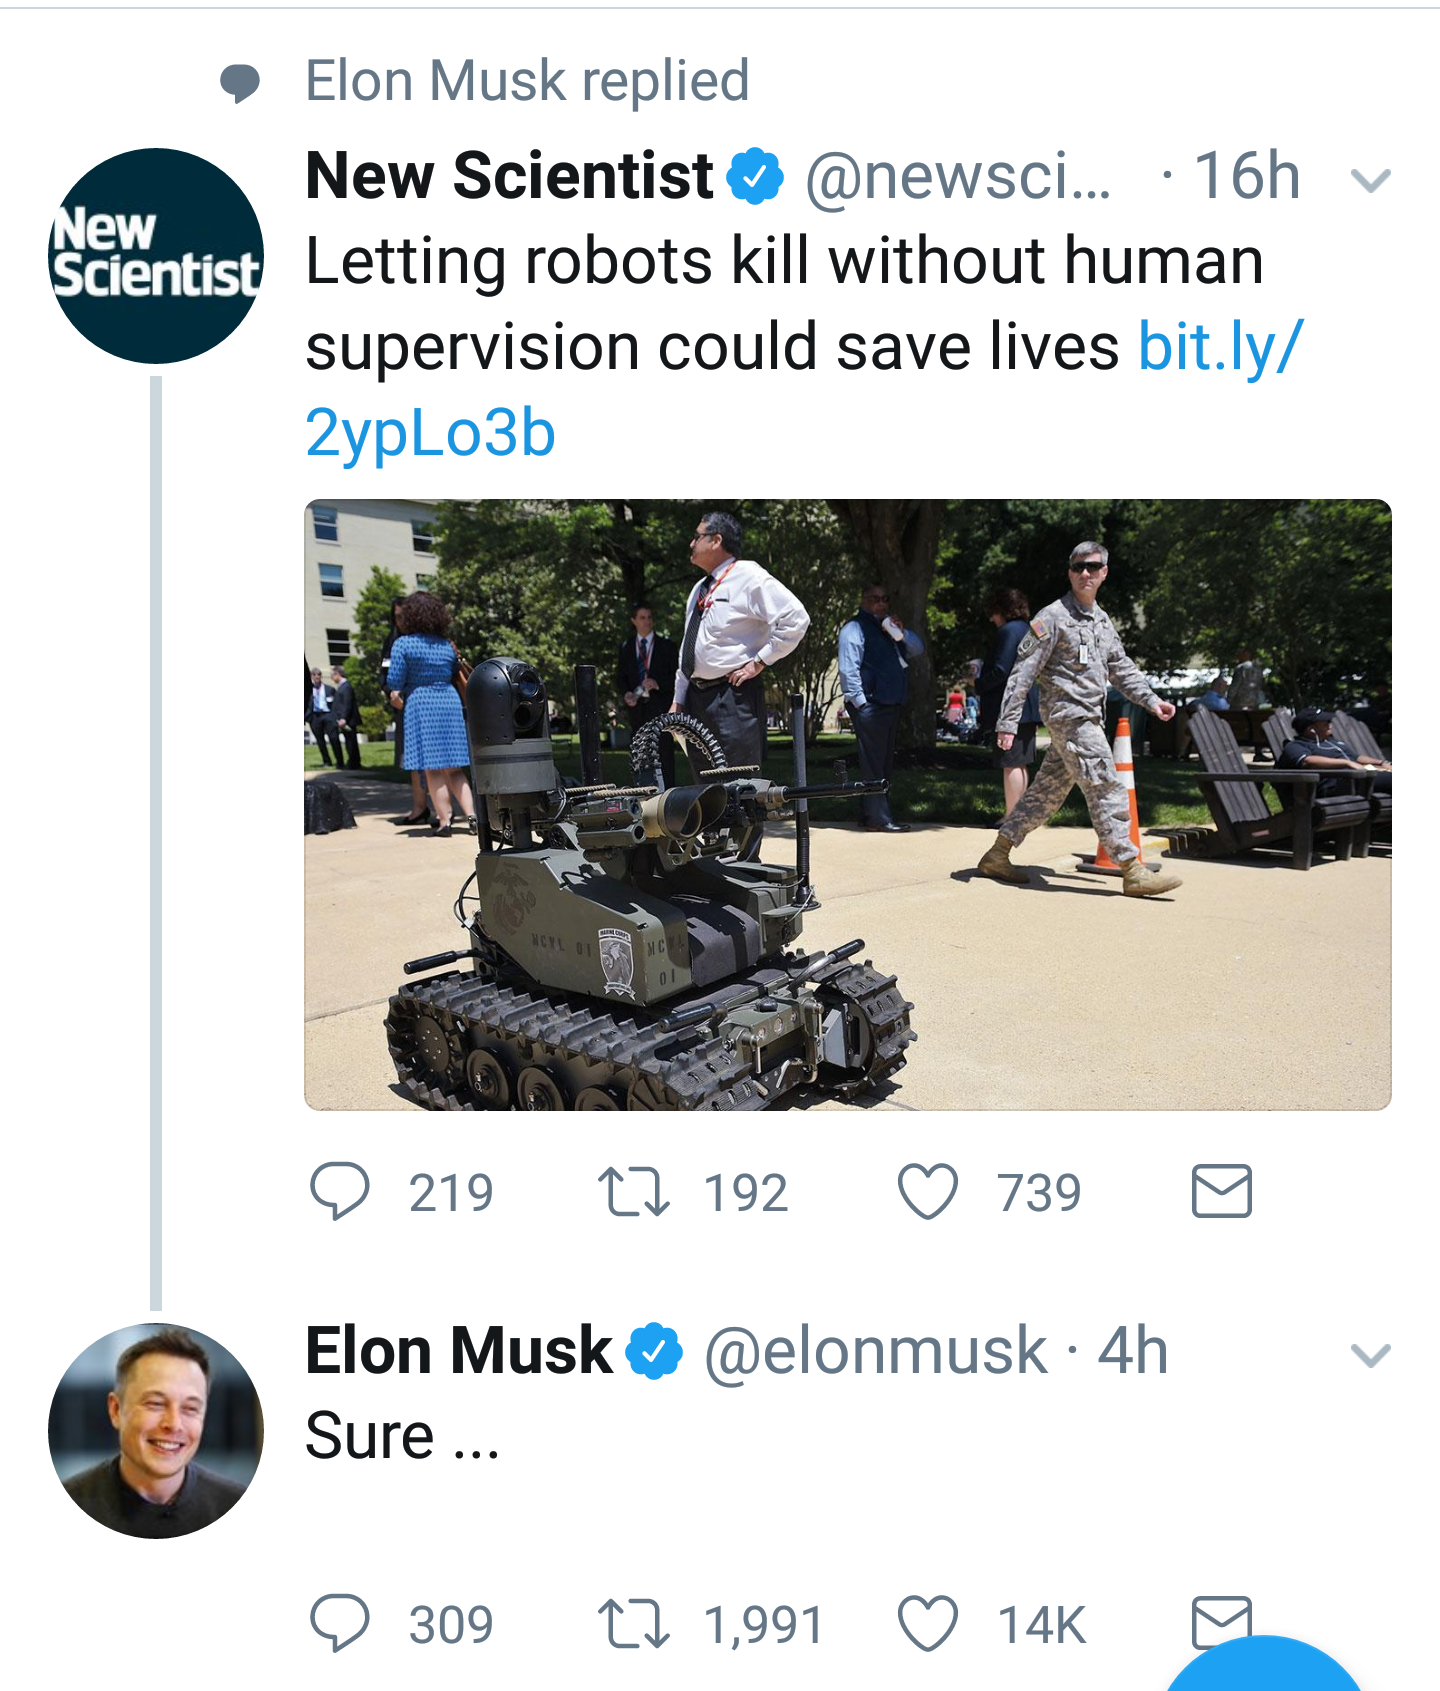 new scientist - Scientist Elon Musk replied New Scientist ... 16h Letting robots kill without human supervision could save lives bit.ly 2ypLo3b 219 2192739 Elon Musk Sure ... . 4h 309 1Z 1,991 14K